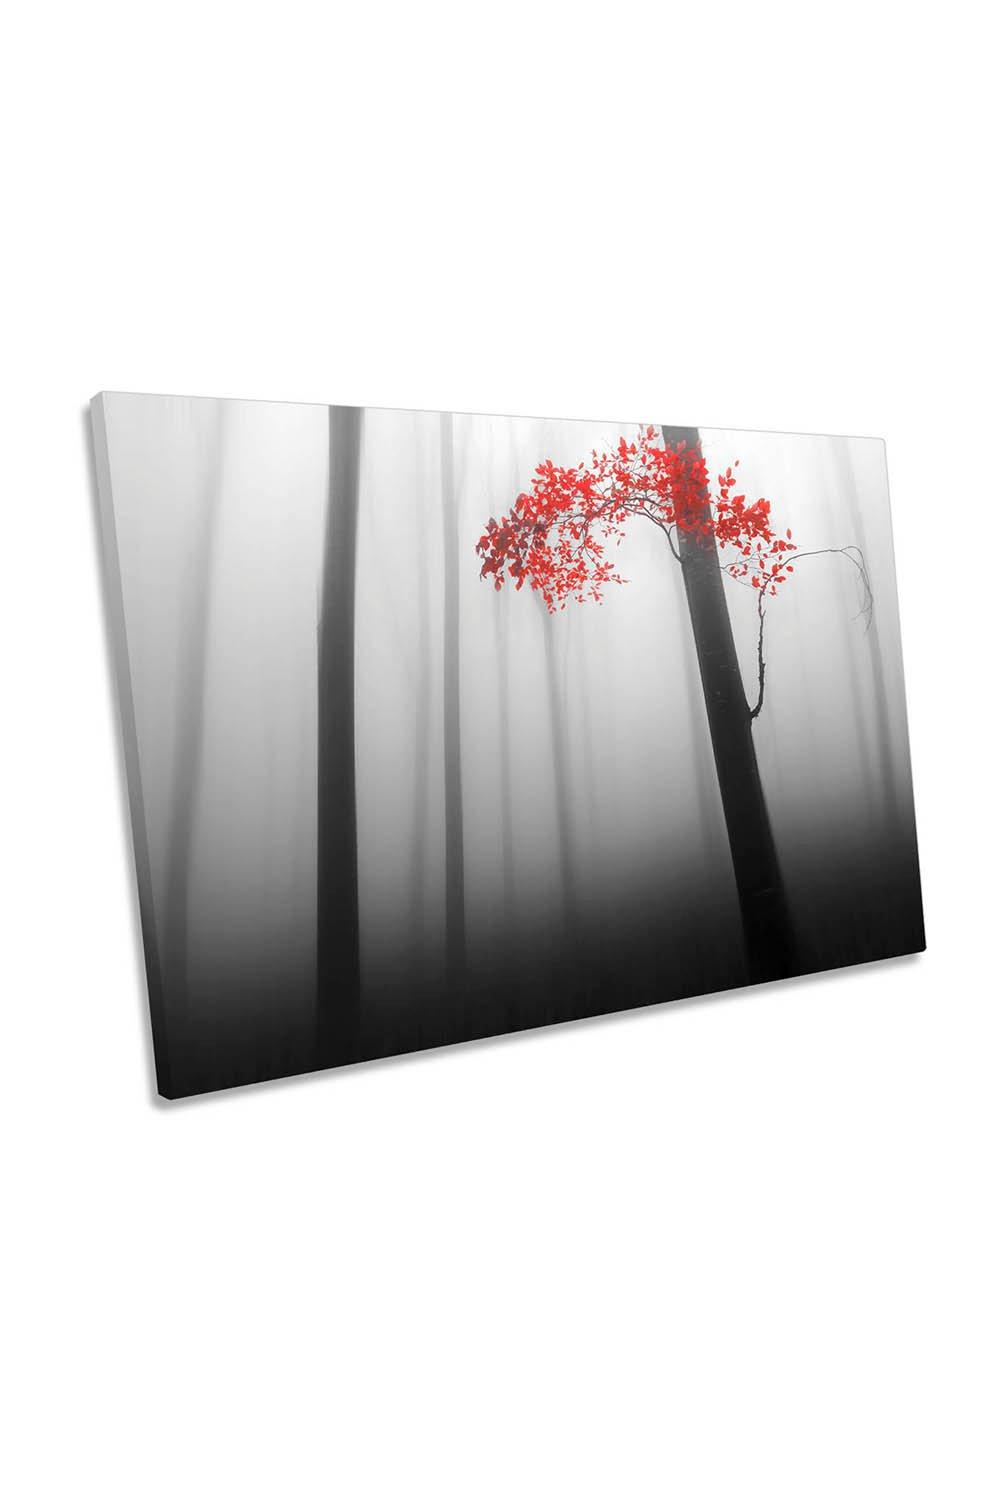 Illusion Red Leaves Misty Forest Canvas Wall Art Picture Print